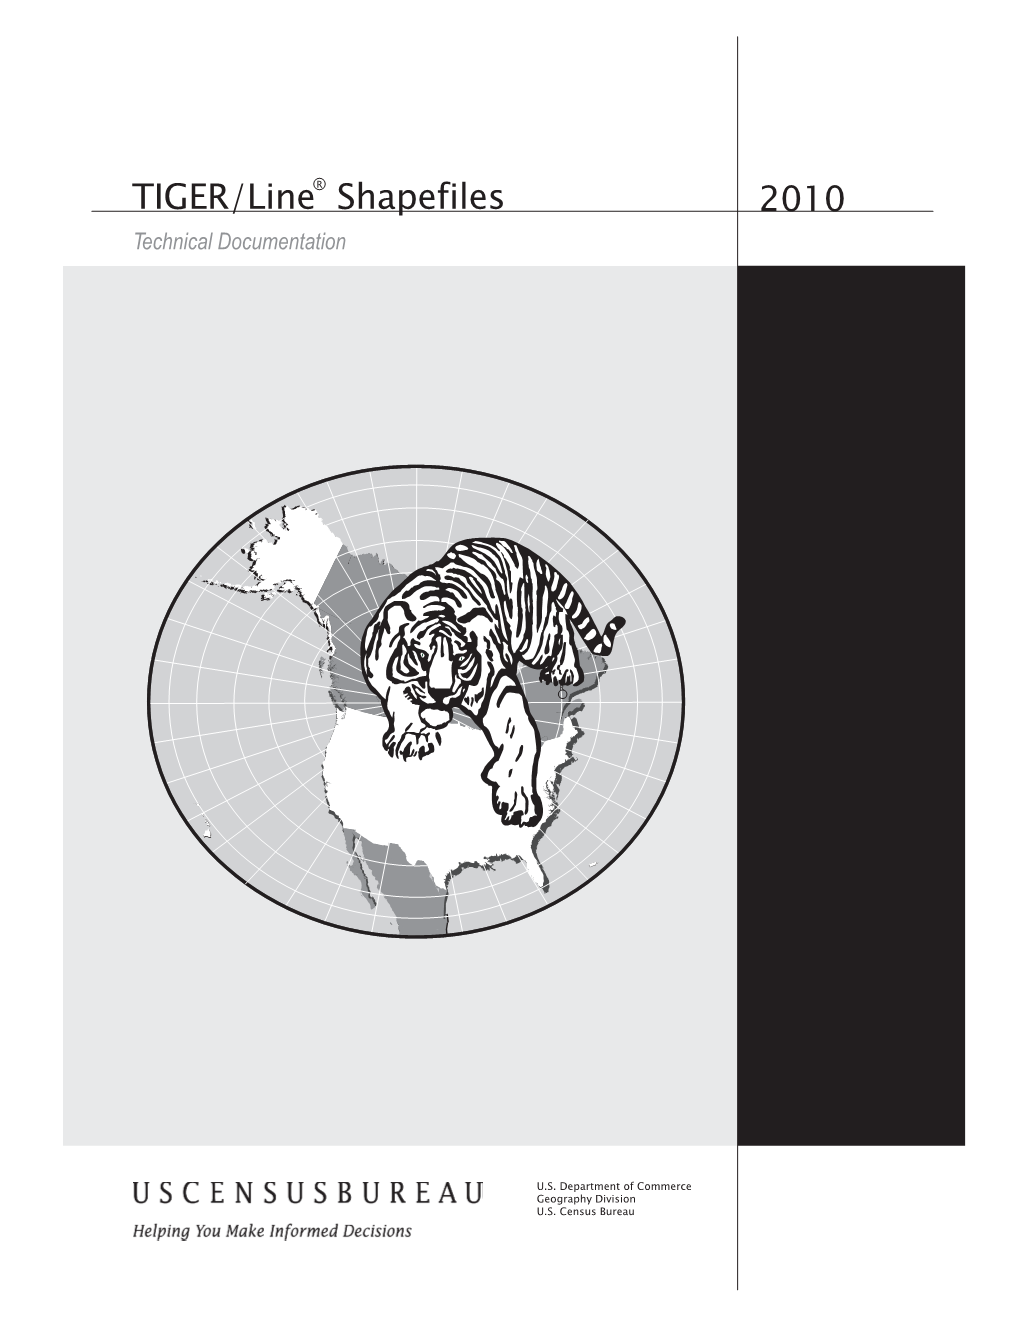 TIGER/Line Shapefiles Technical Documentation/Prepared by the U.S